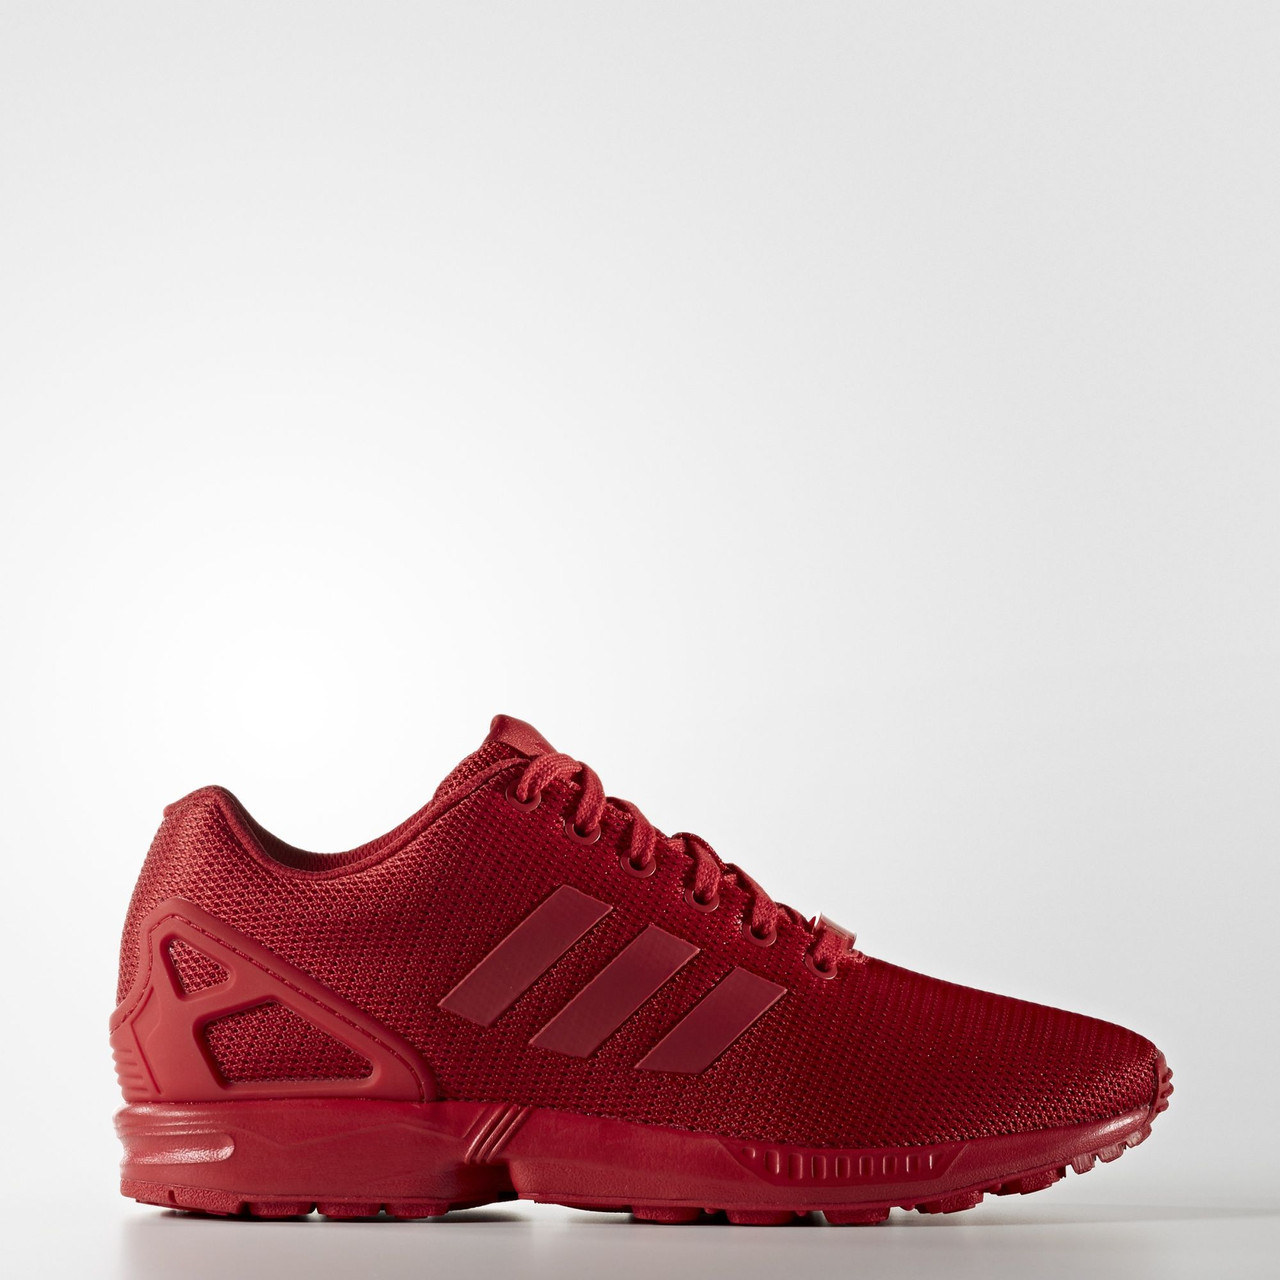 zx flux electricity